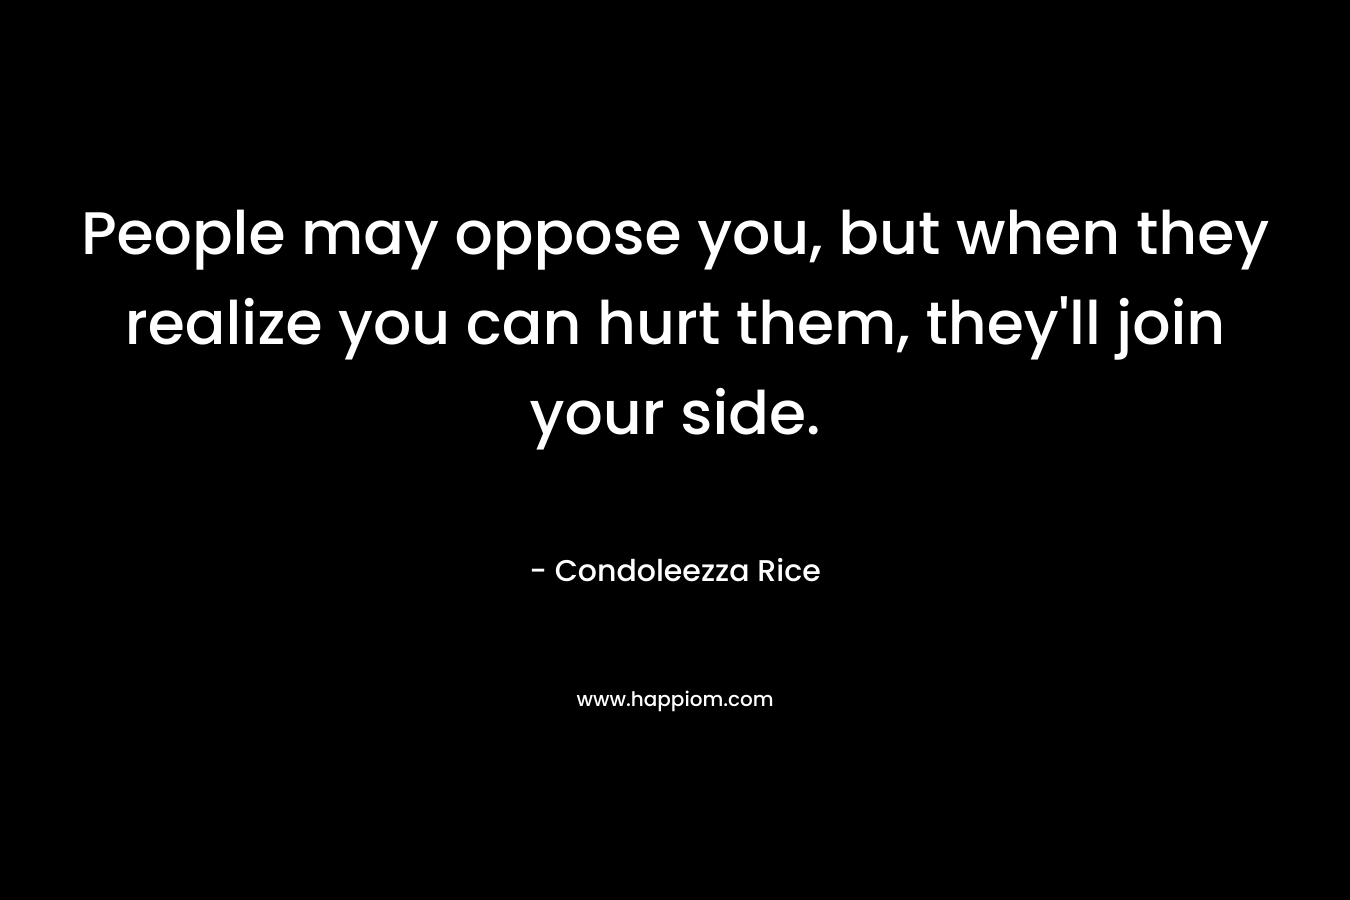 People may oppose you, but when they realize you can hurt them, they’ll join your side. – Condoleezza Rice